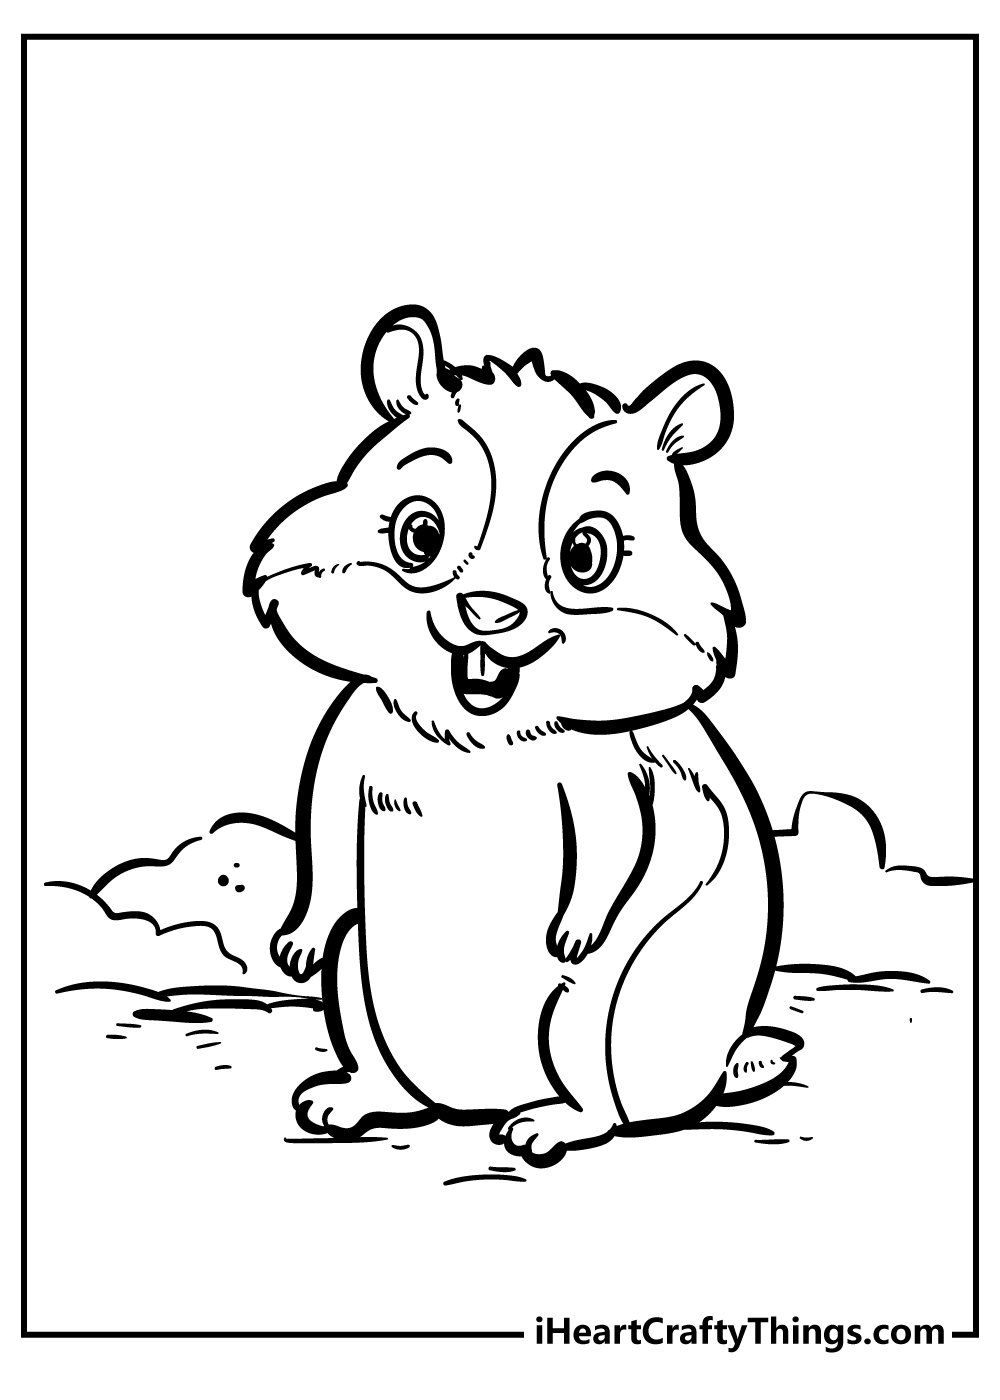 Hamster Coloring Pages free pdf download